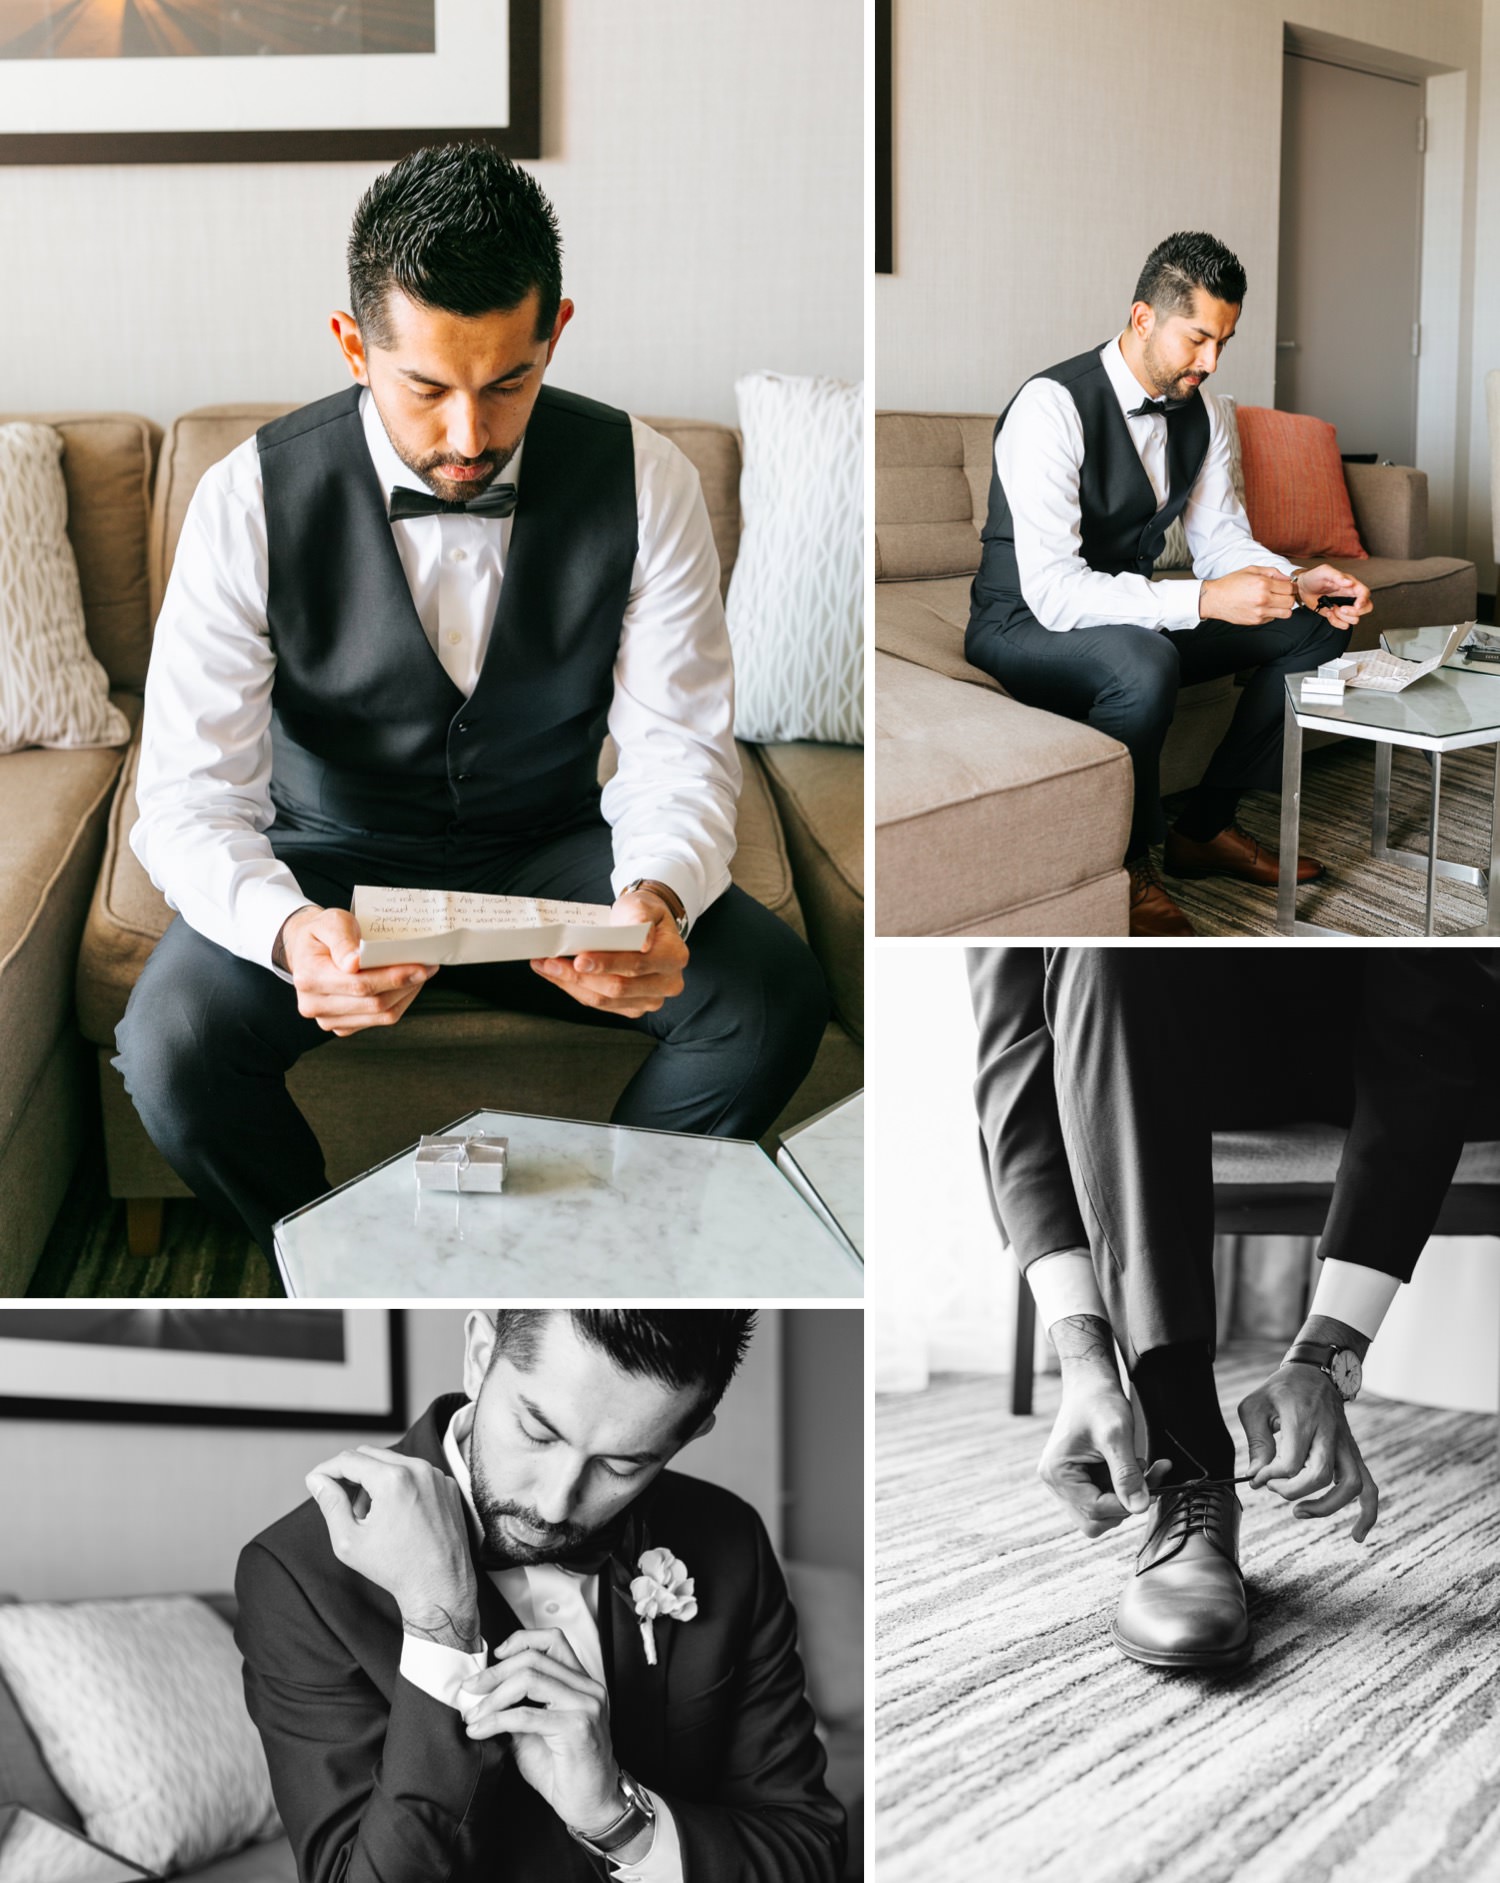 Groom Details and getting ready photos - Los Angeles - Wedding Photographer - https://brittneyhannonphotography.com